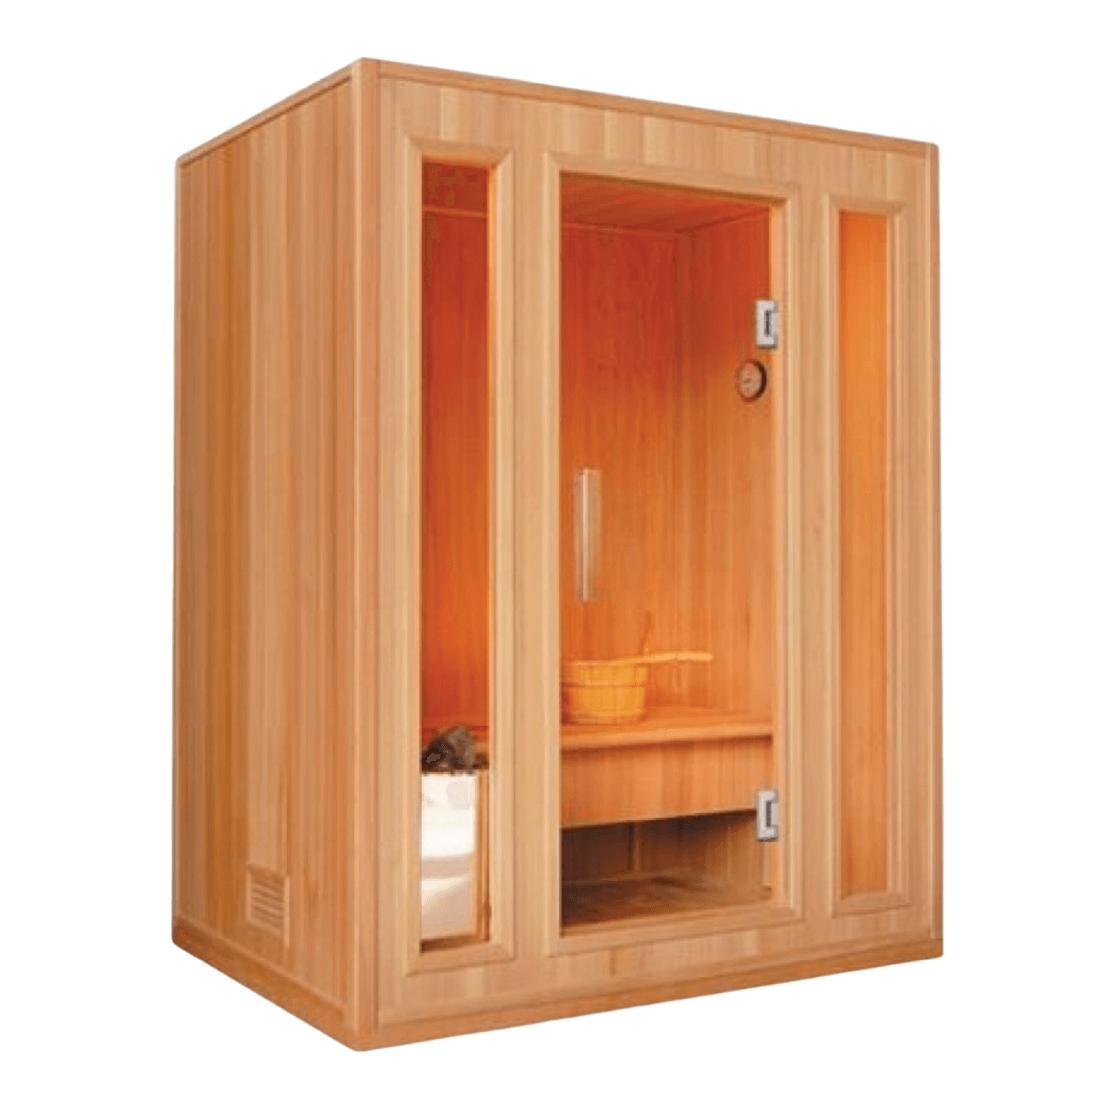 Sunray 3-Person Southport Traditional Steam Sauna HL300SN